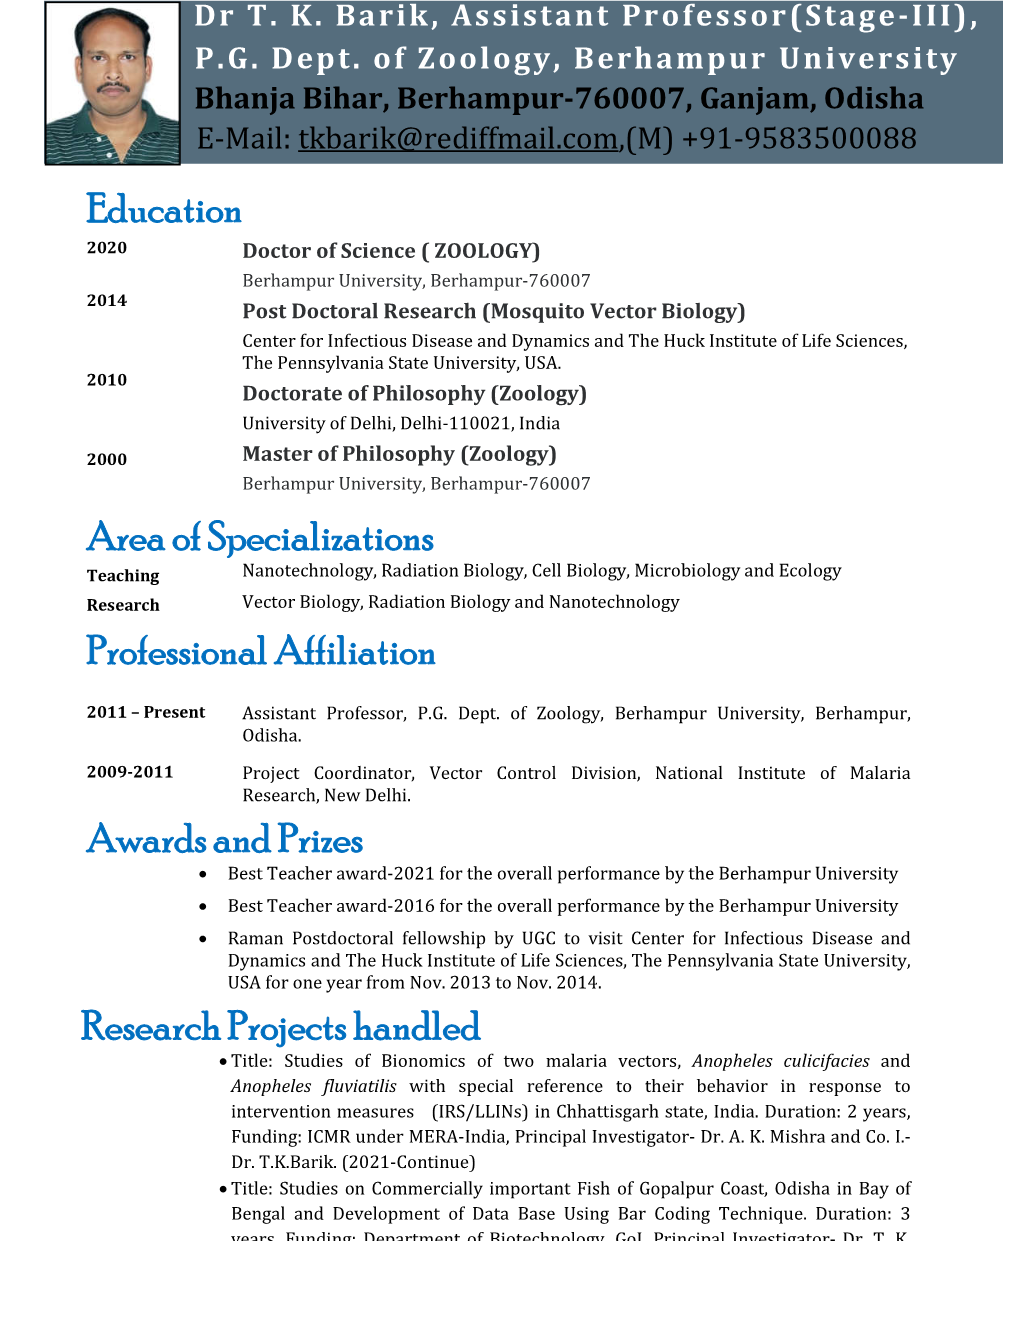 Education Area of Specializations Professional Affiliation Awards And